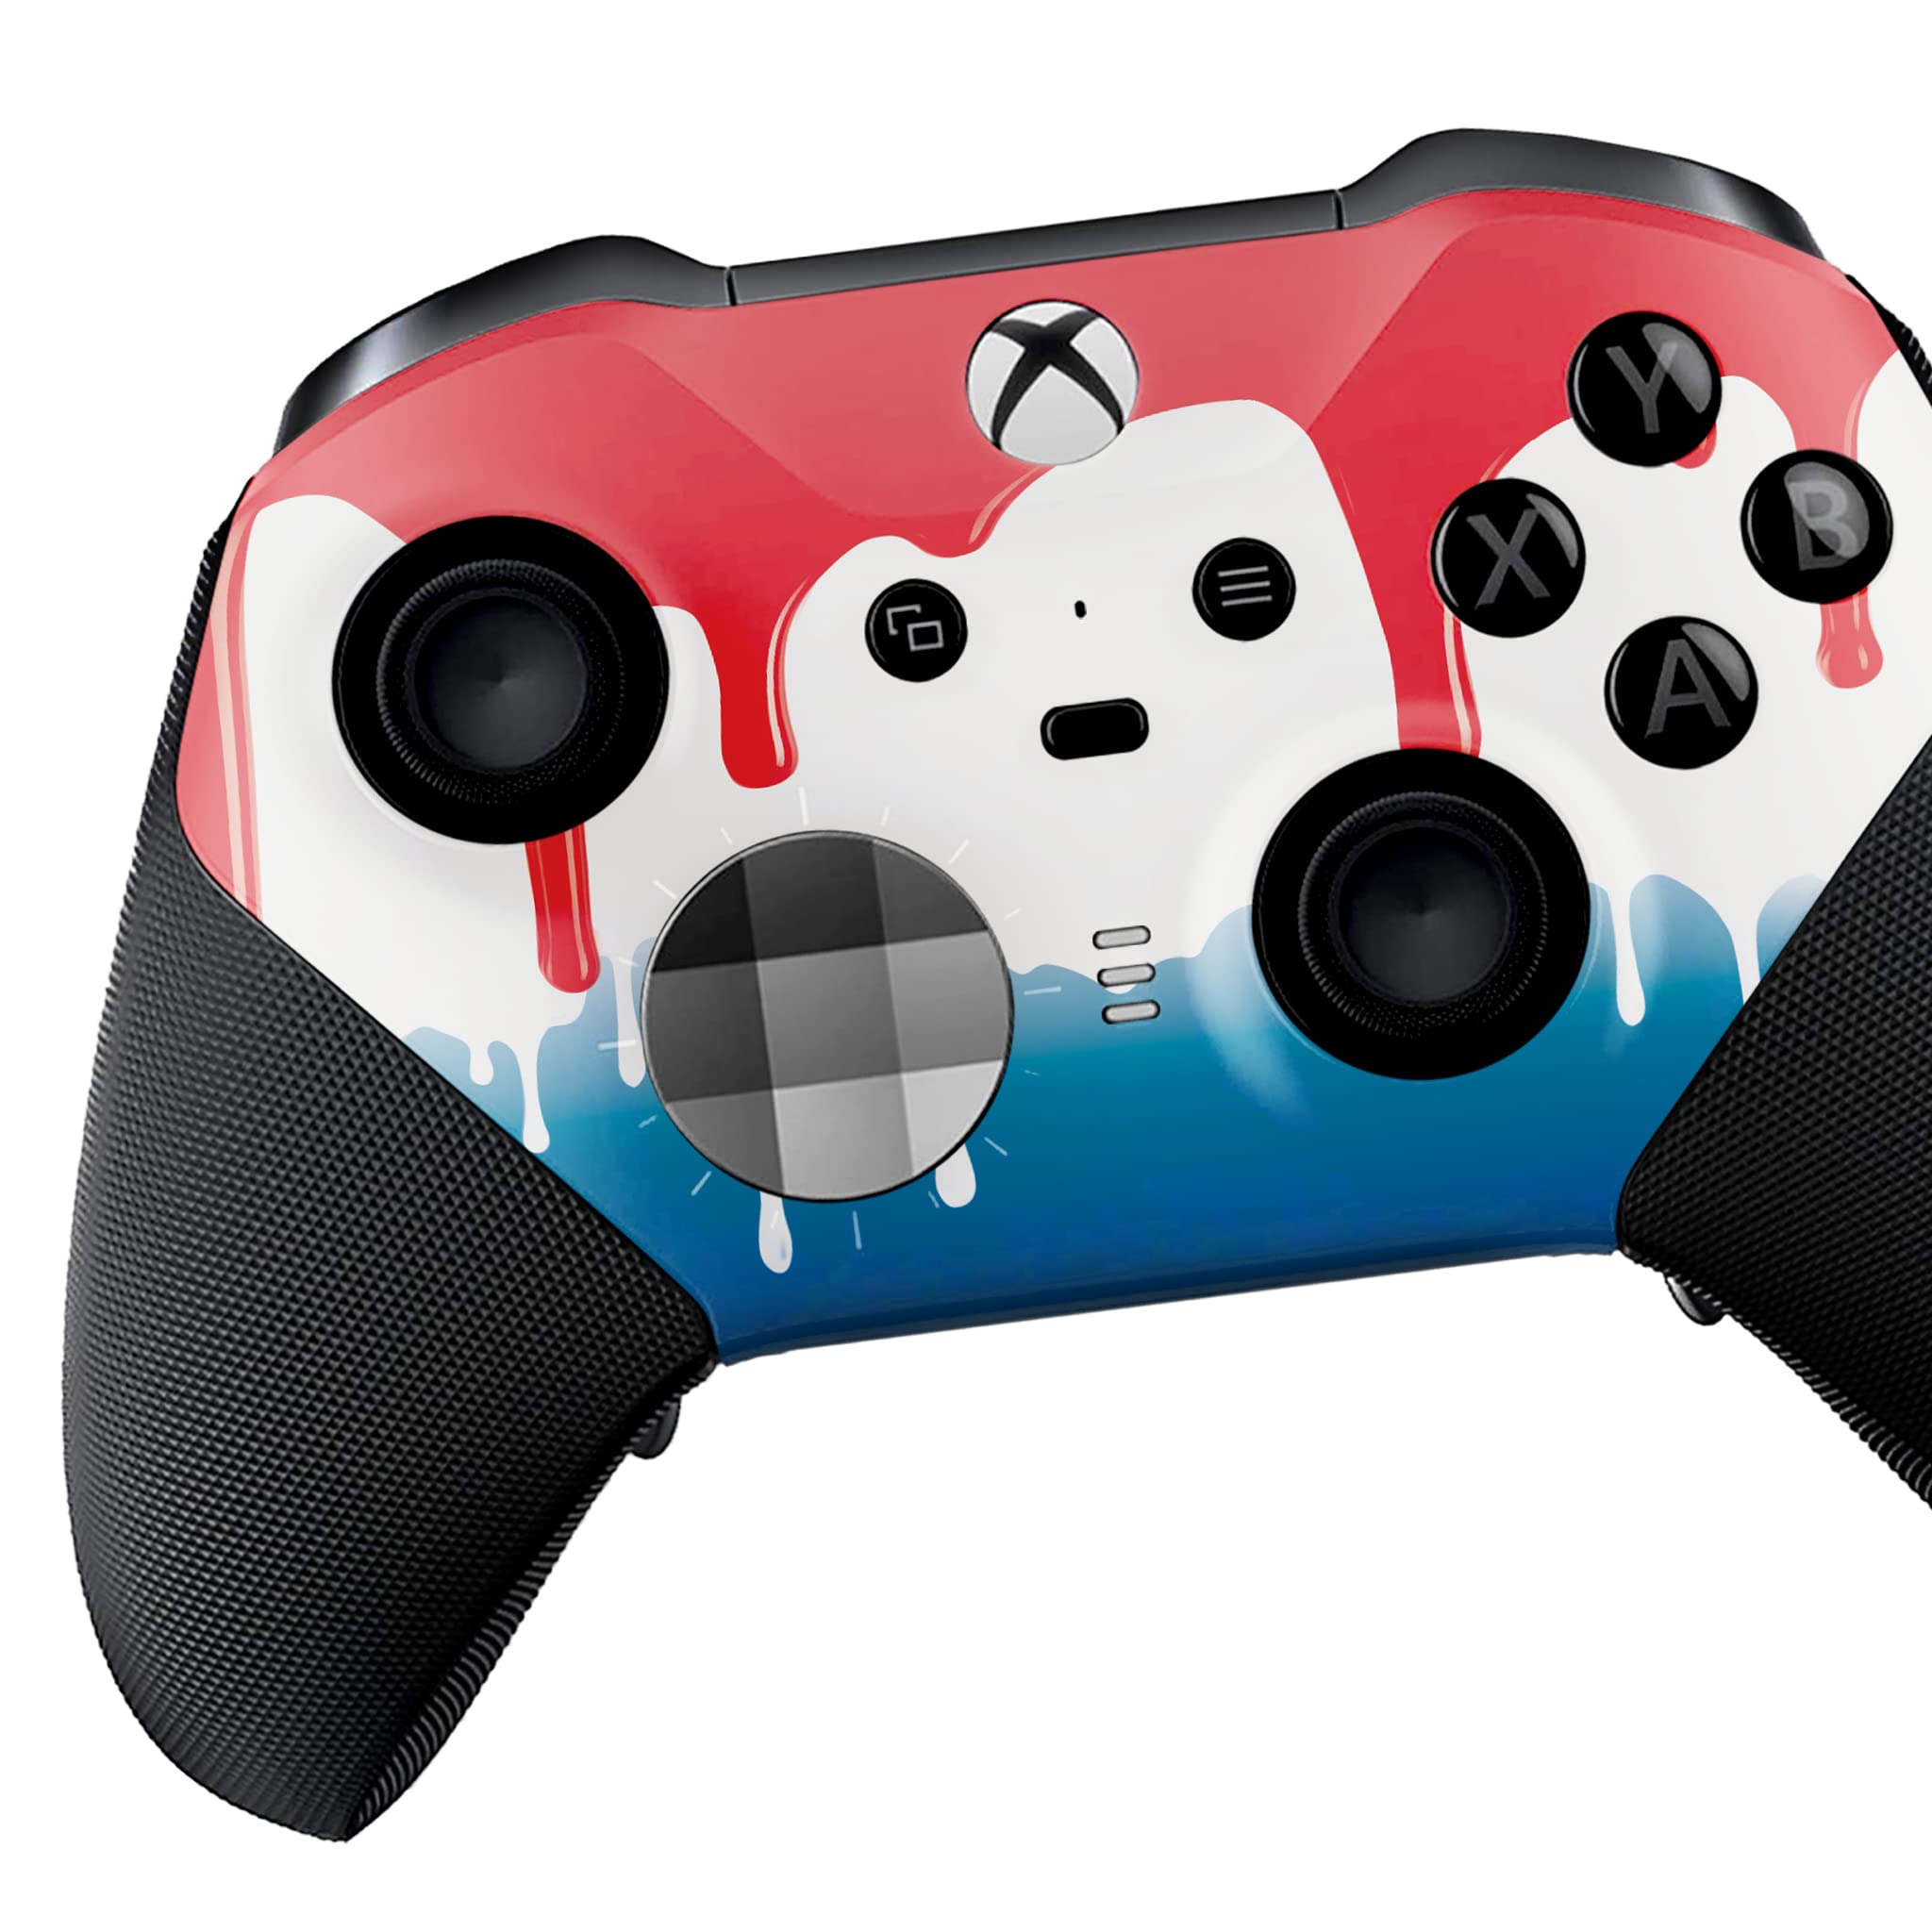 Custom Xbox Elite Controller Series Compatible with Xbox One, Xbox Series  X, Xbox Series S. All Original Accessories Included. Customized in USA by  DreamController